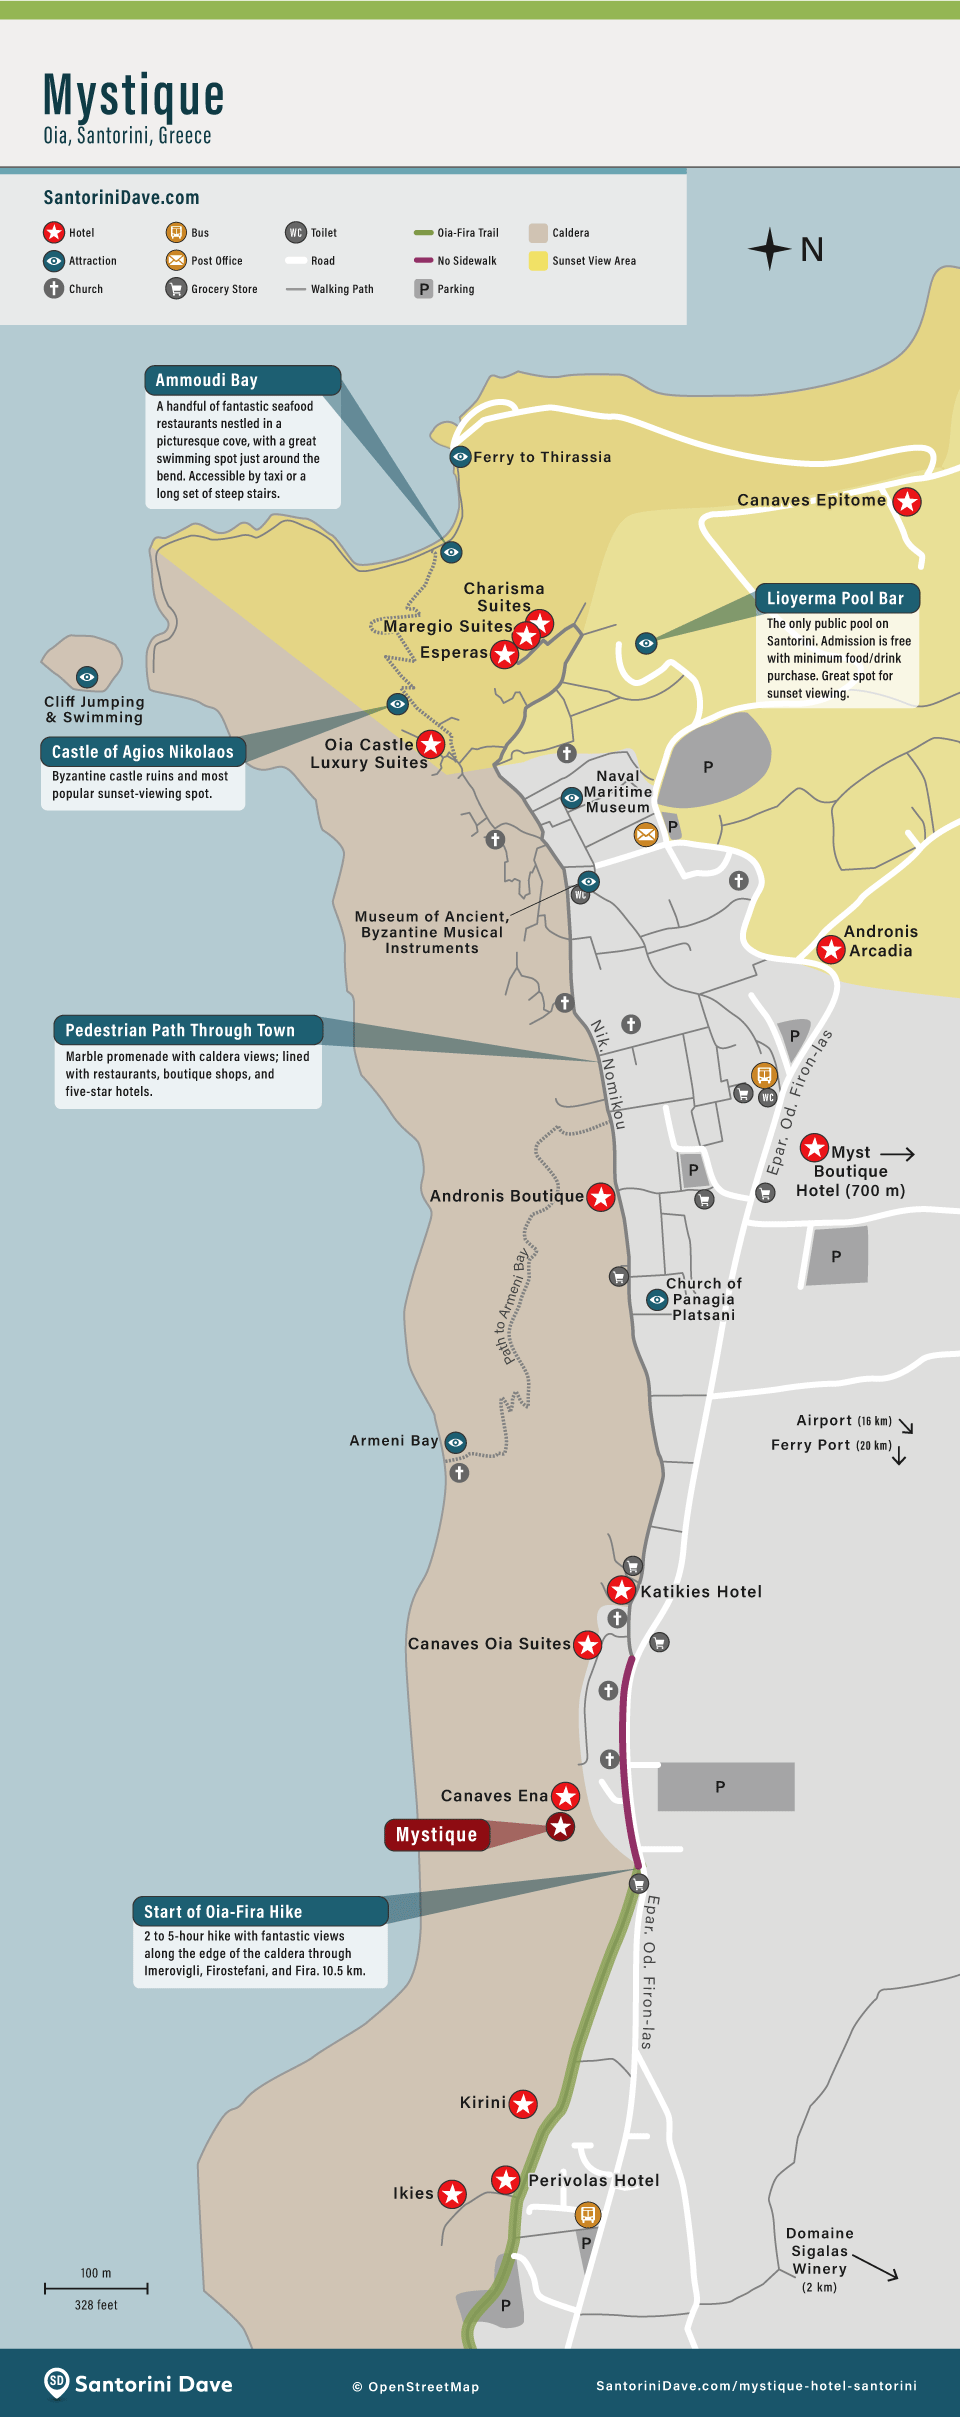 Map of Mystique Hotel's location and proximity to Ammoudi Bay, the Castle, and the walking path in Oia, Santorini, Greece.